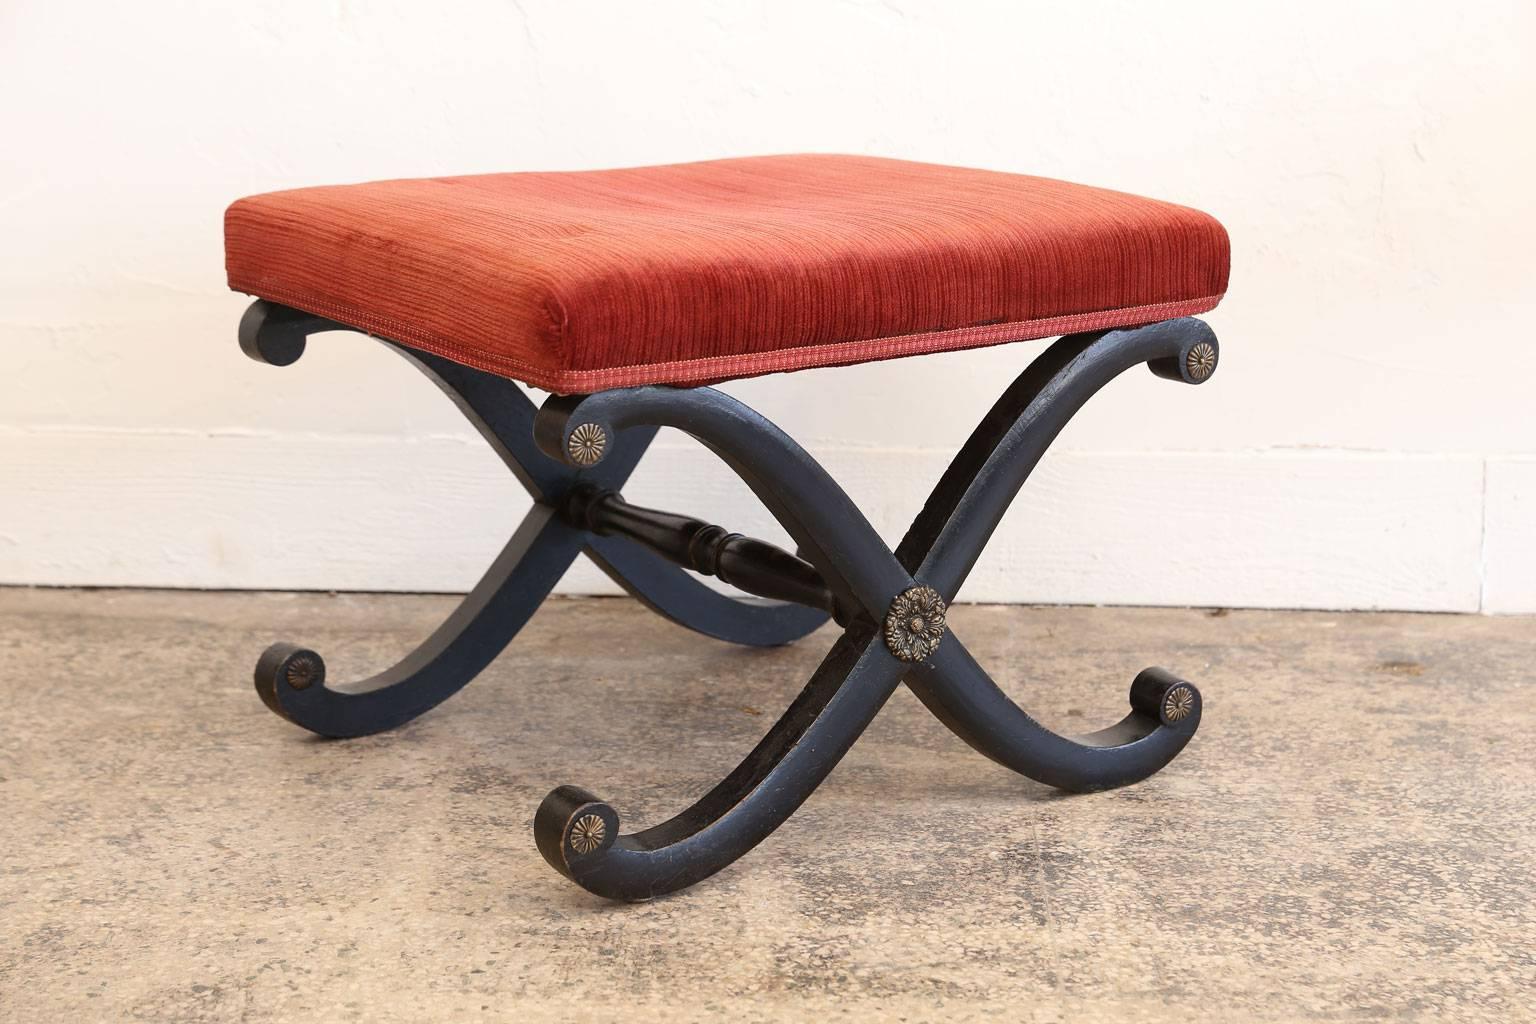 Regency X-frame stool, in its original ebonized finish and brass mounts. This extremely decorative English foot stool dates from circa 1810-1820 and is constructed from sturdy, strong mahogany. Upholstery is not new and ready to be recovered.